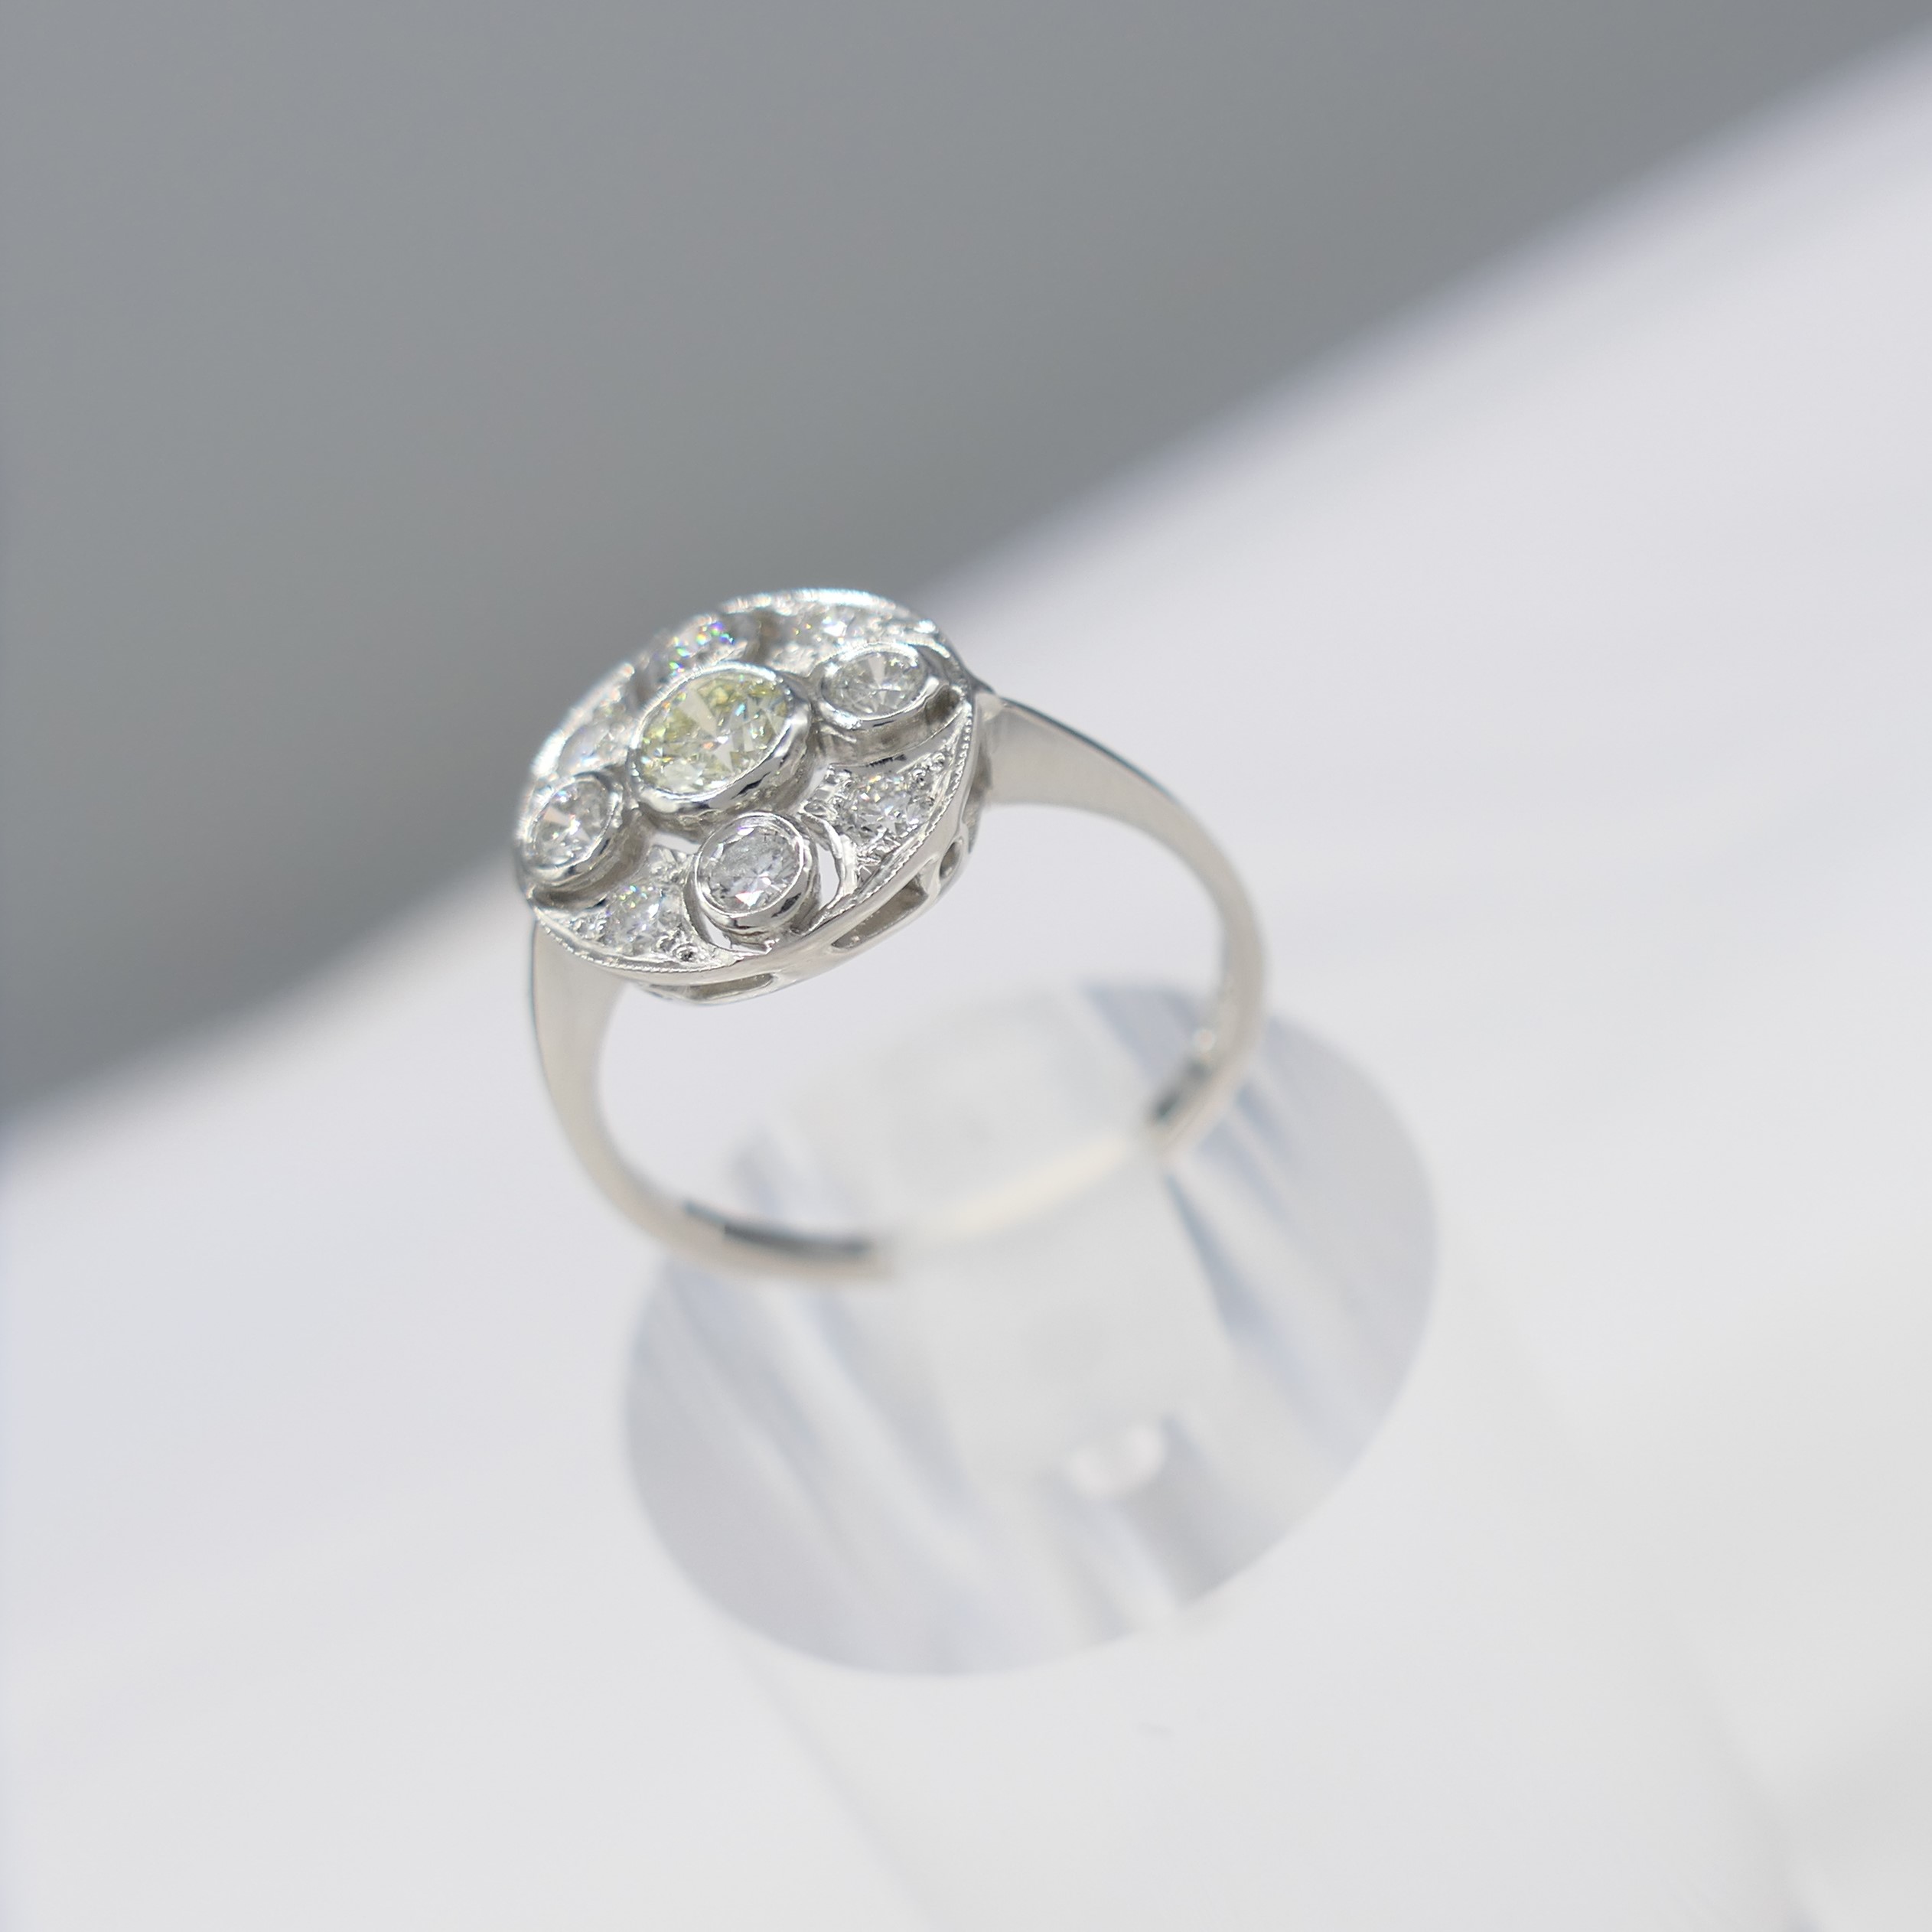 A Vintage-Style Platinum And 0.60Ct Diamond Cluster Ring - Image 2 of 8